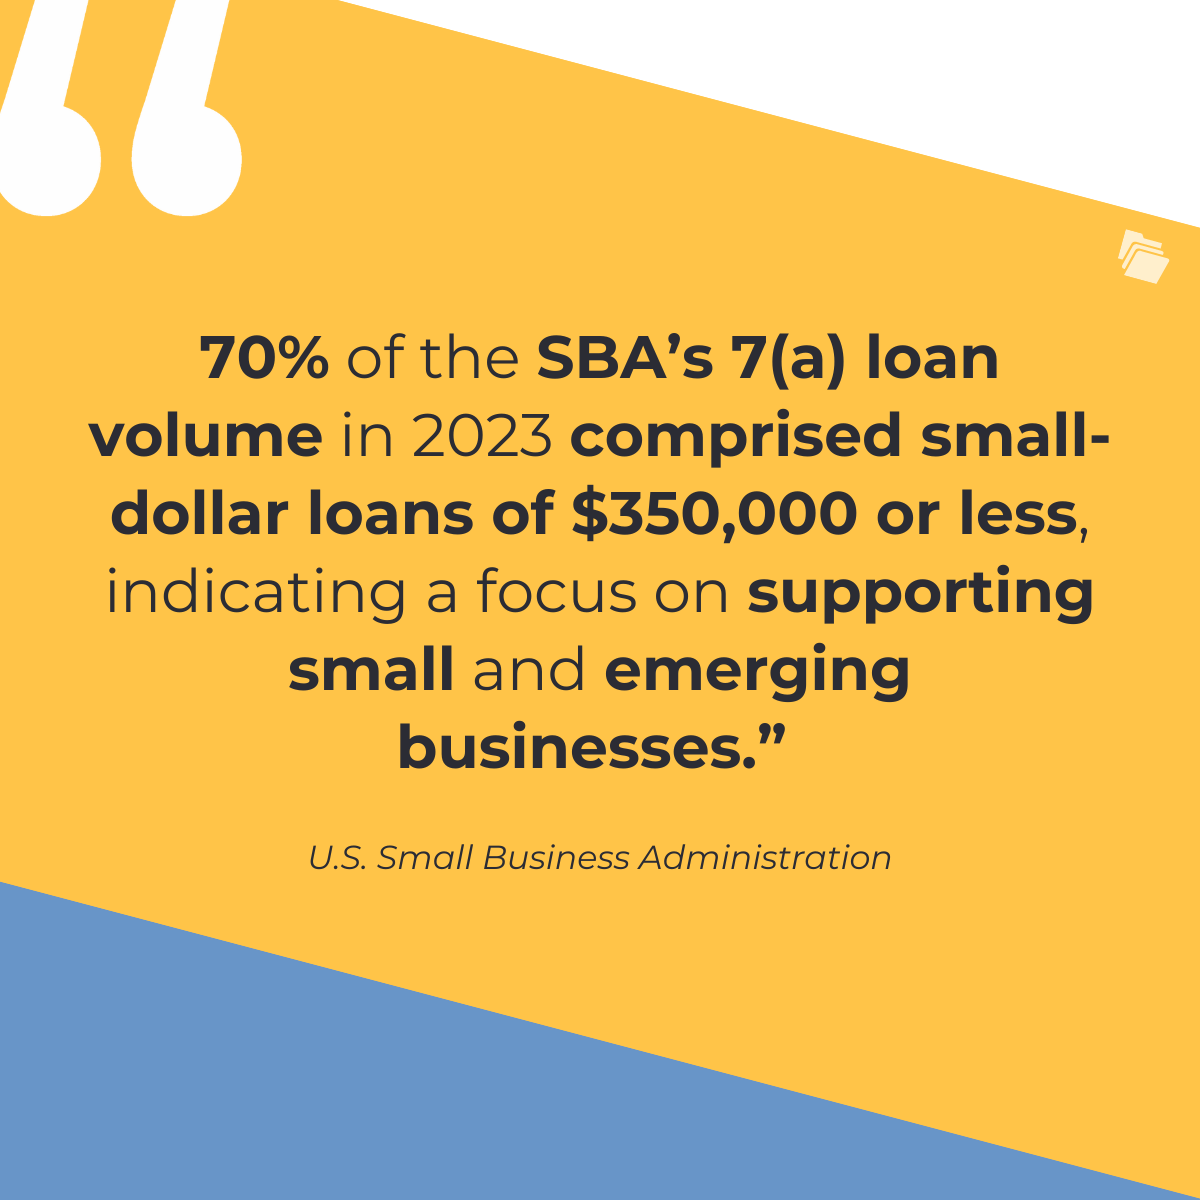 The Ultimate Guide to Brokering Successful SBA Transactions